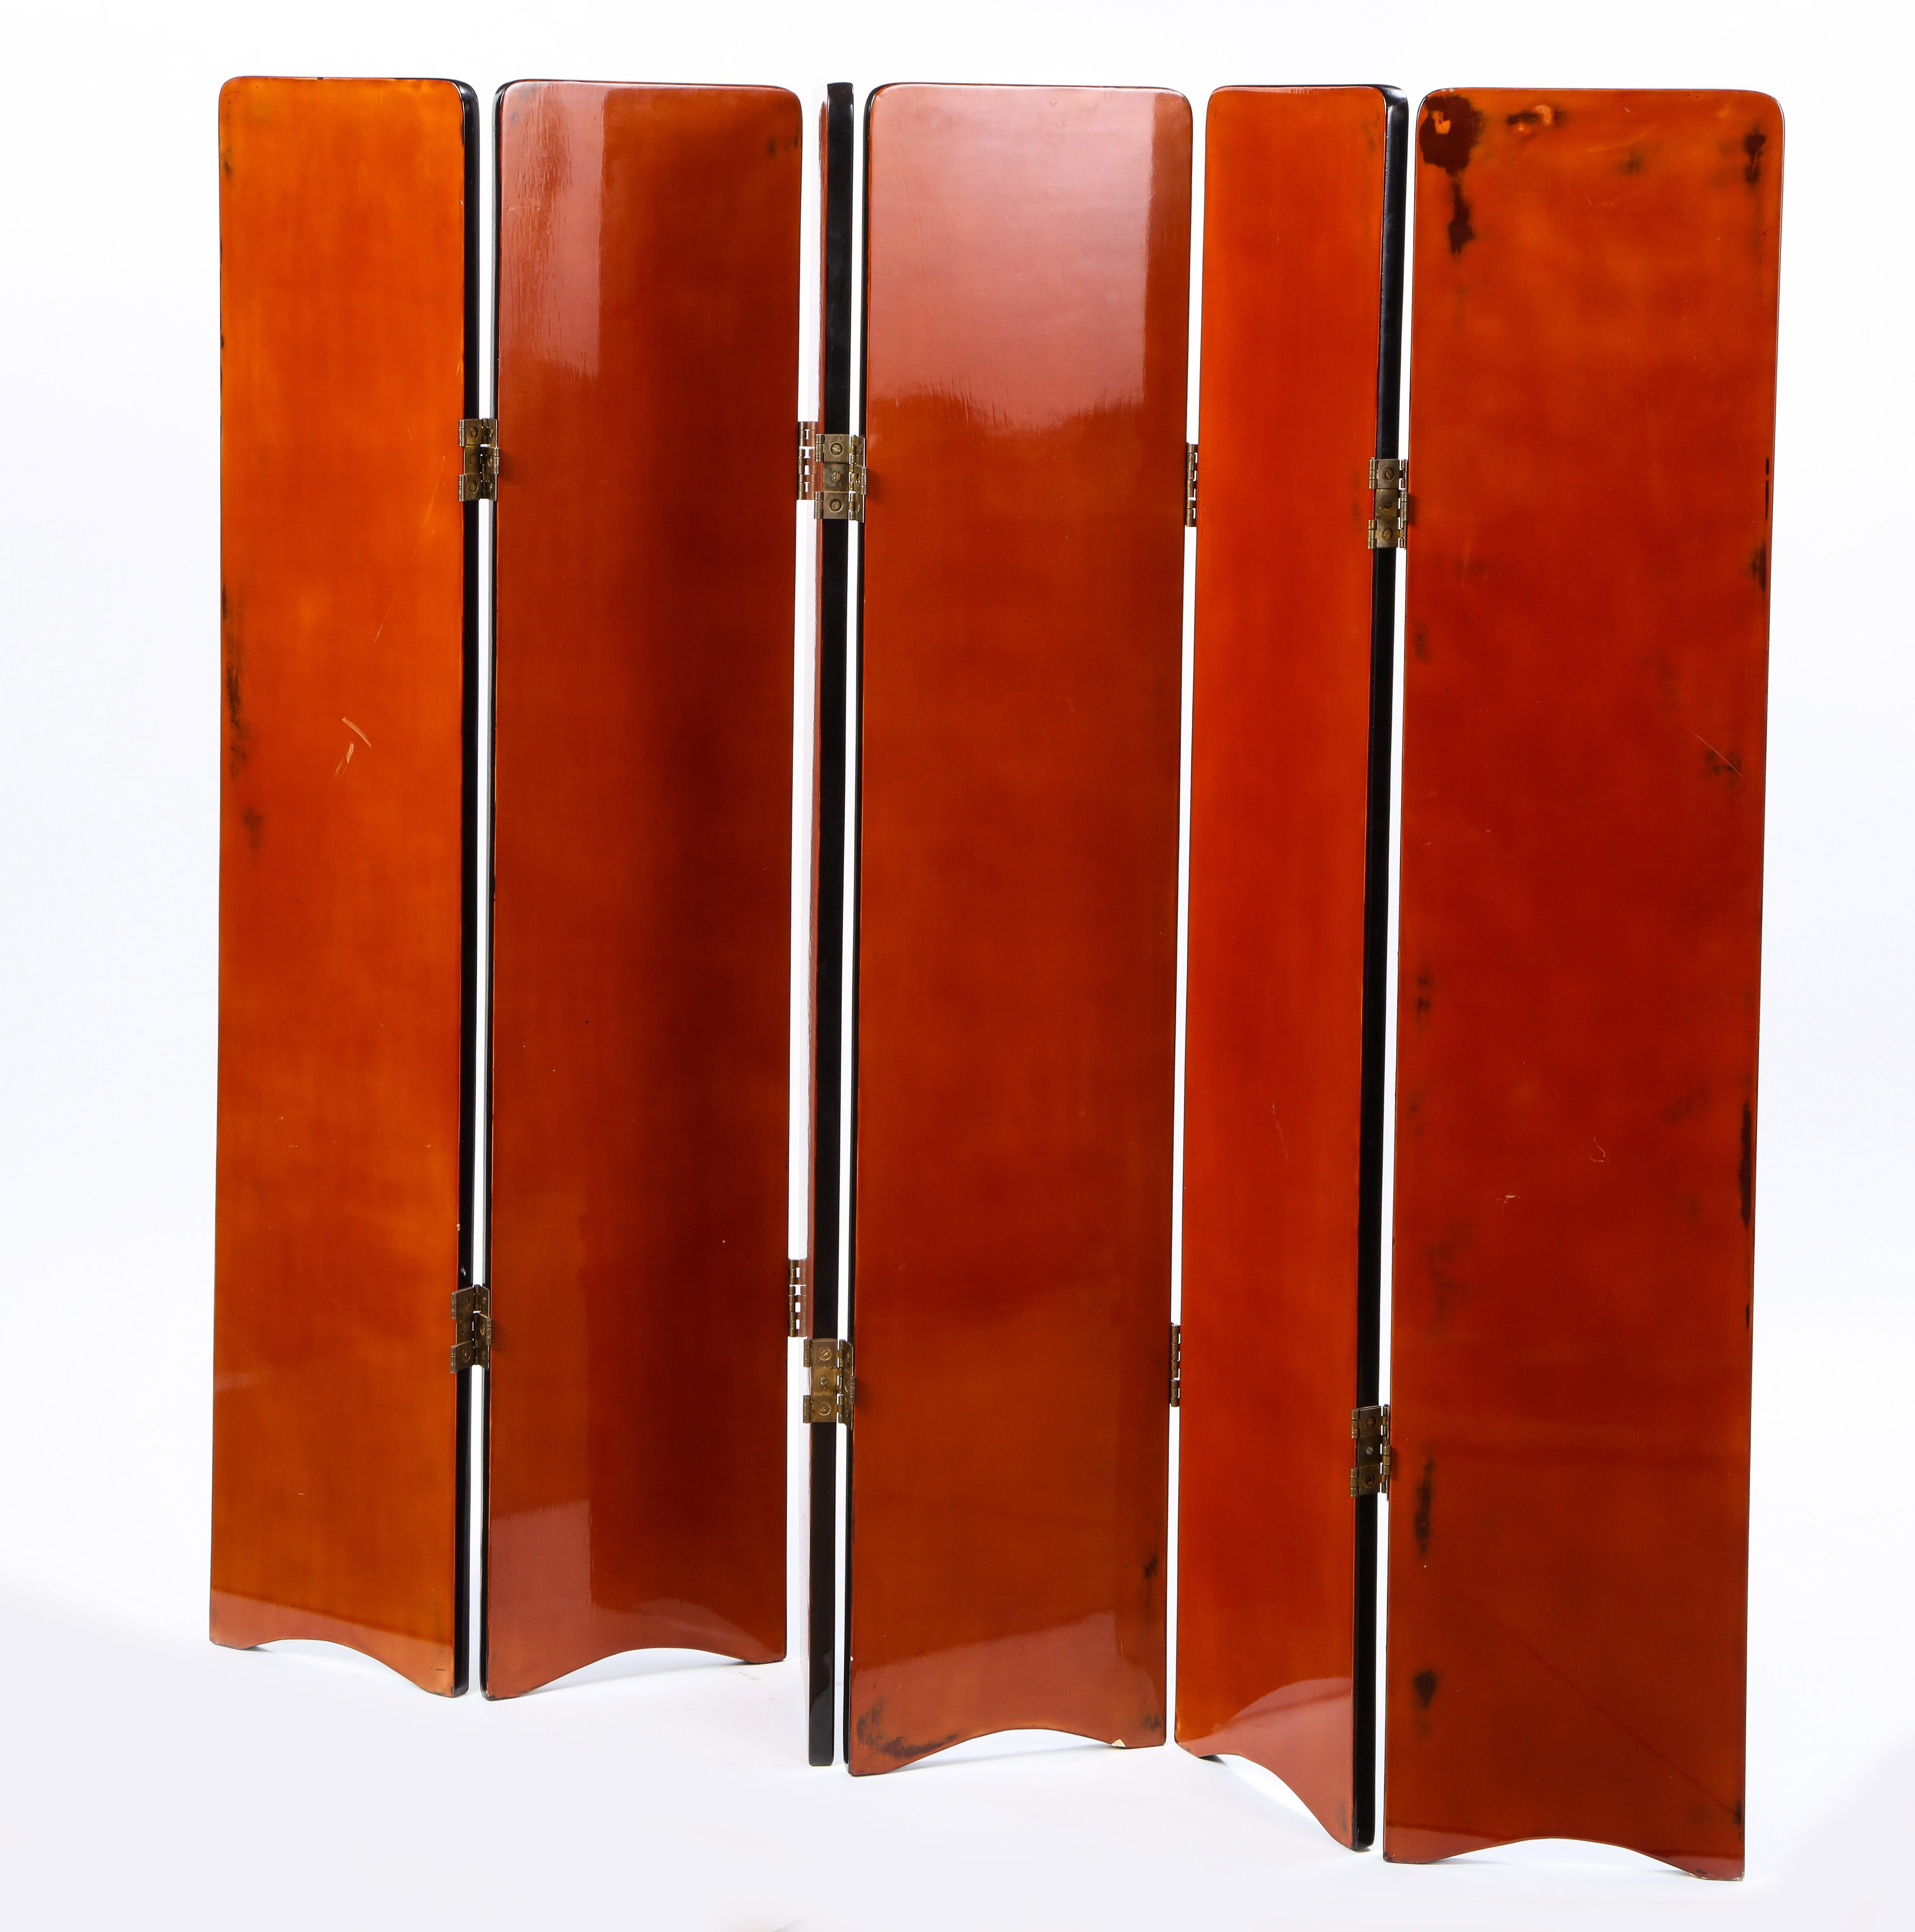 Six-Panel Lacquer Screen in Orange and Black, Modern 1